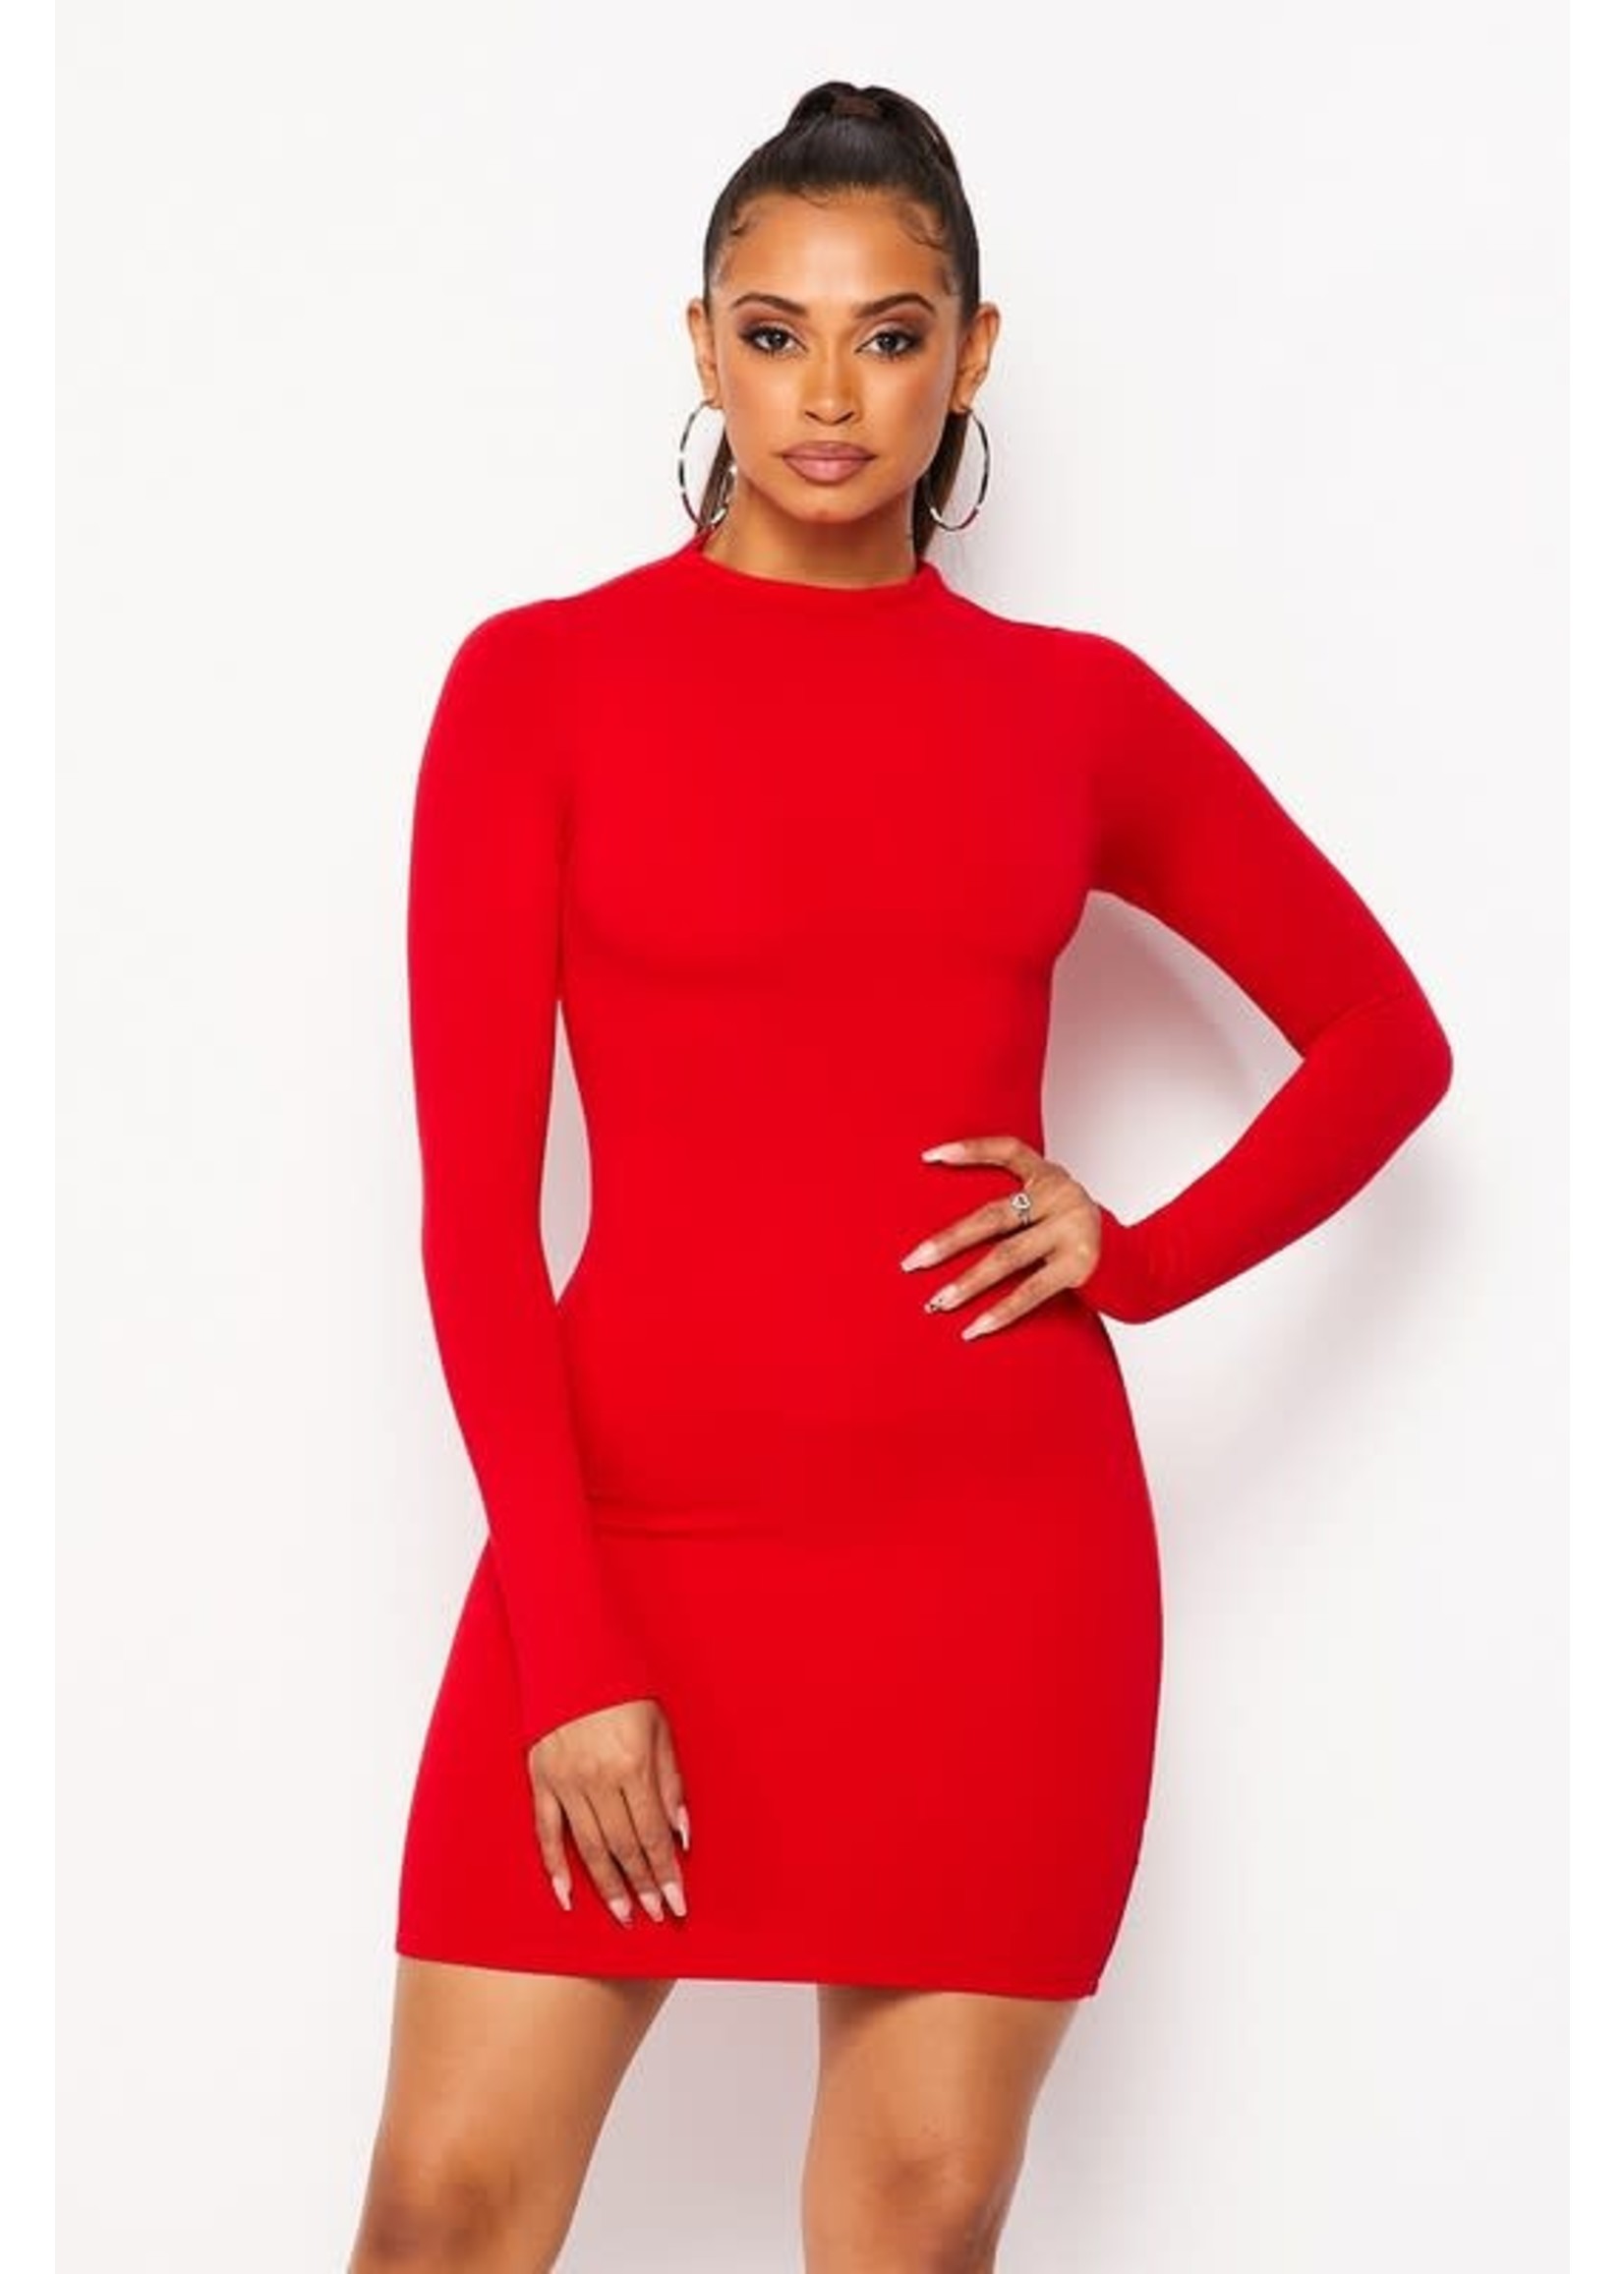 HOT + DELICIOUS All That And More Bodycon Dress - BD20300